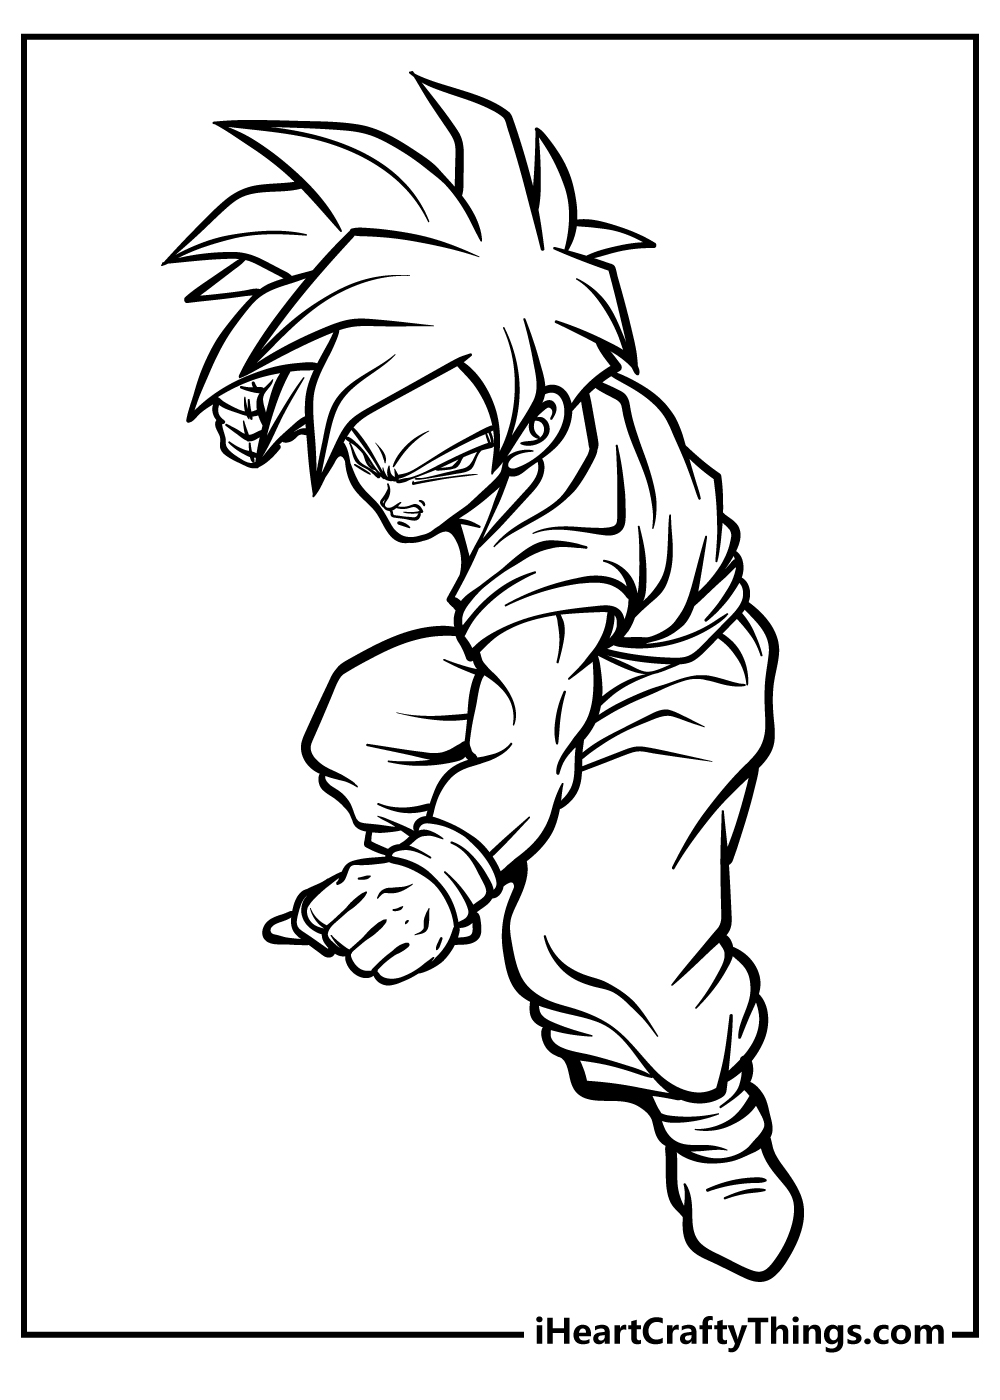 Dragon Ball Z Coloring Pages for preschoolers free printable